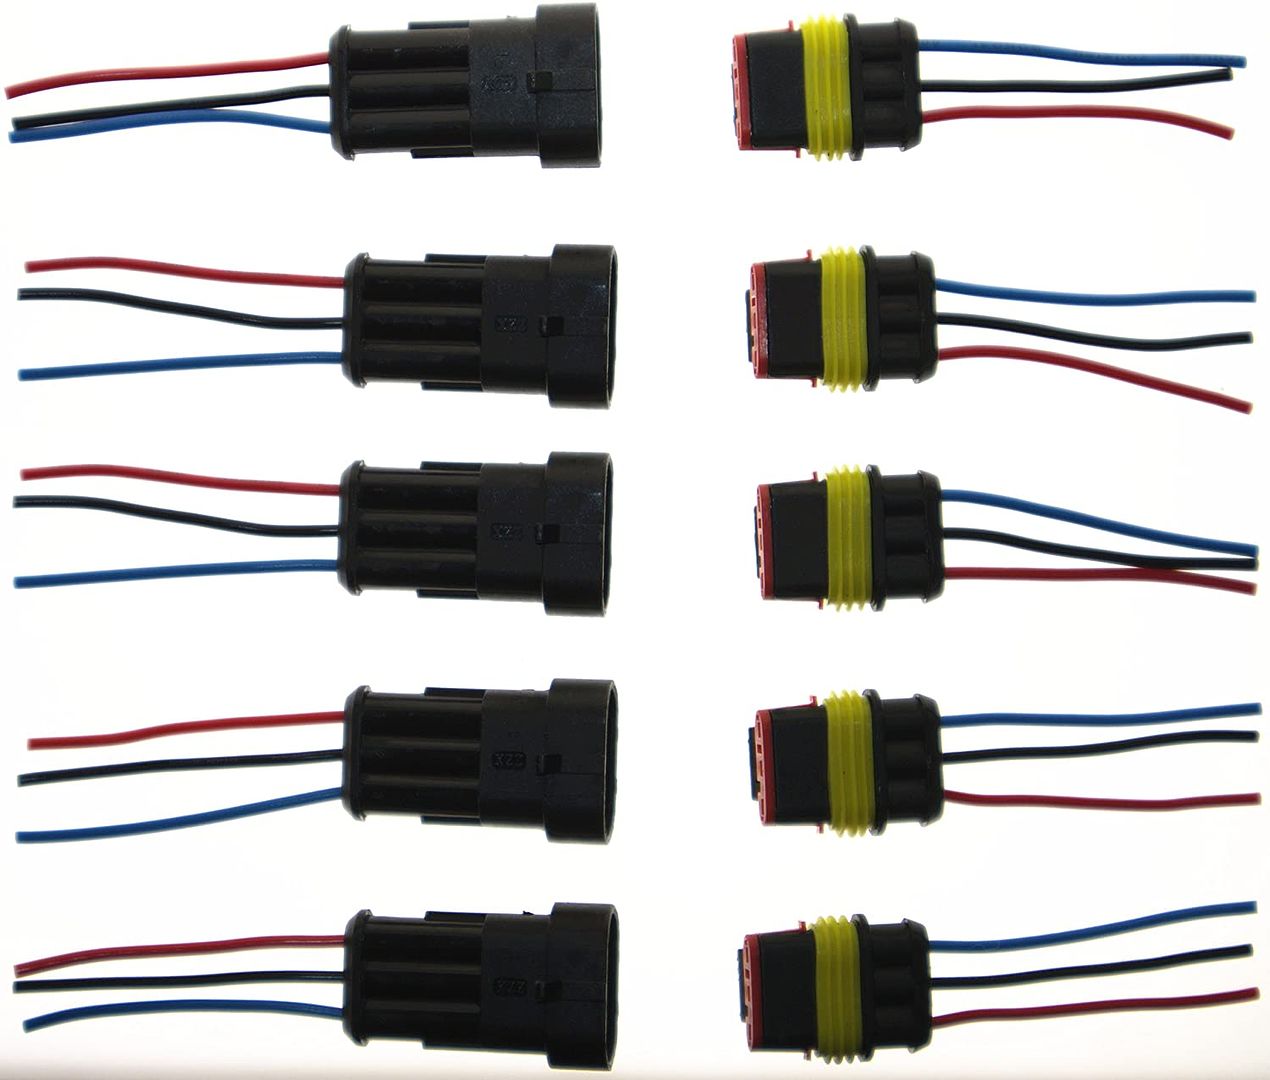 PES 5 KIT 3 PIN WATERPROOF ELECTRICAL WIRE CONNECTOR PLUG